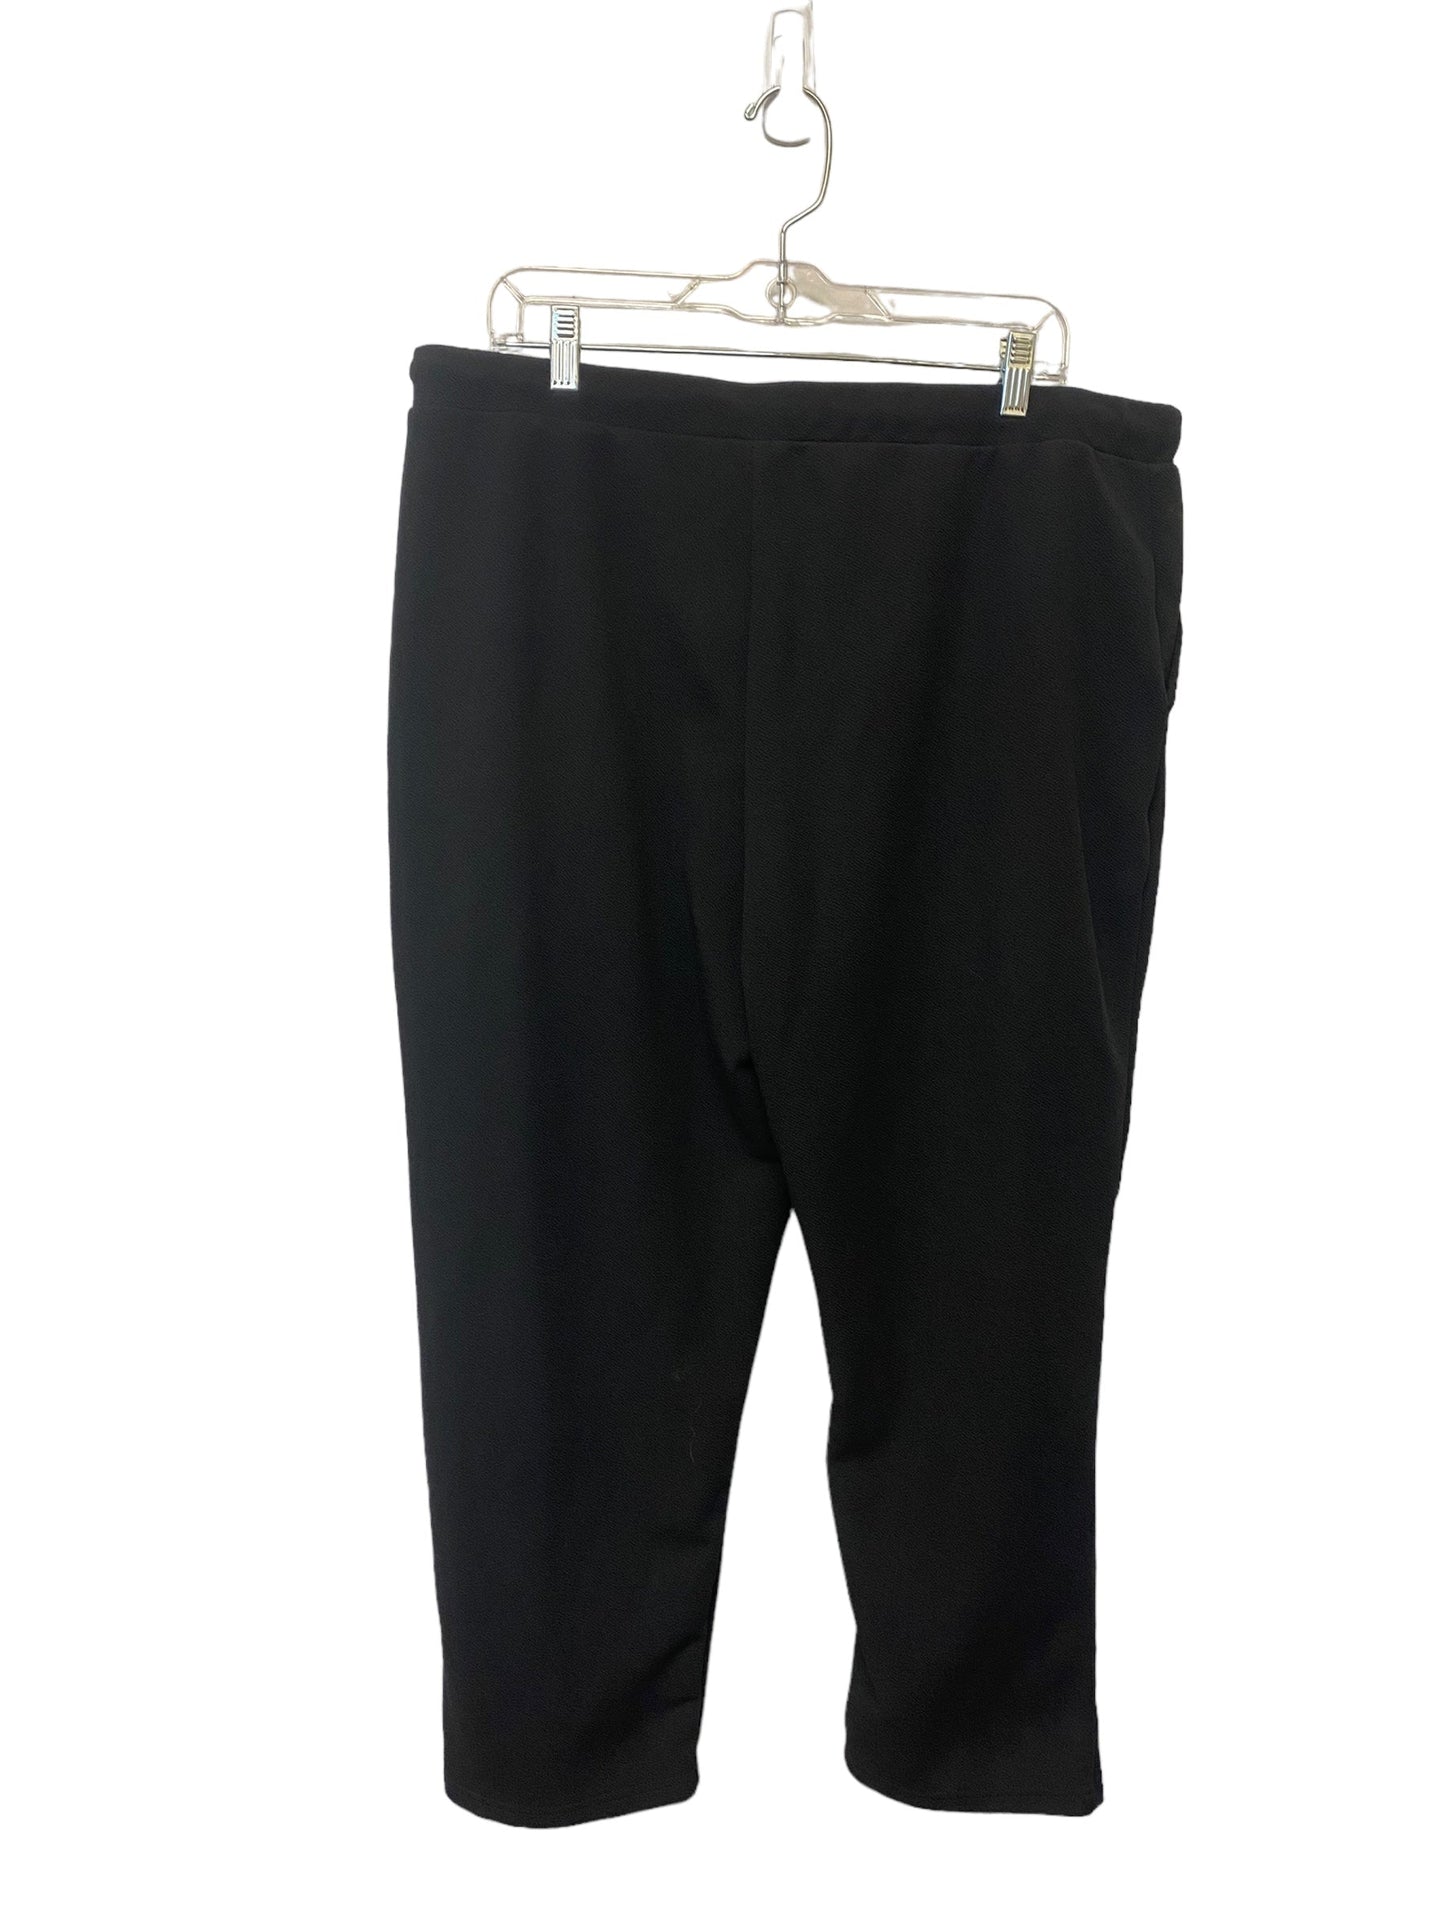 Black Pants Other Clothes Mentor, Size 3x